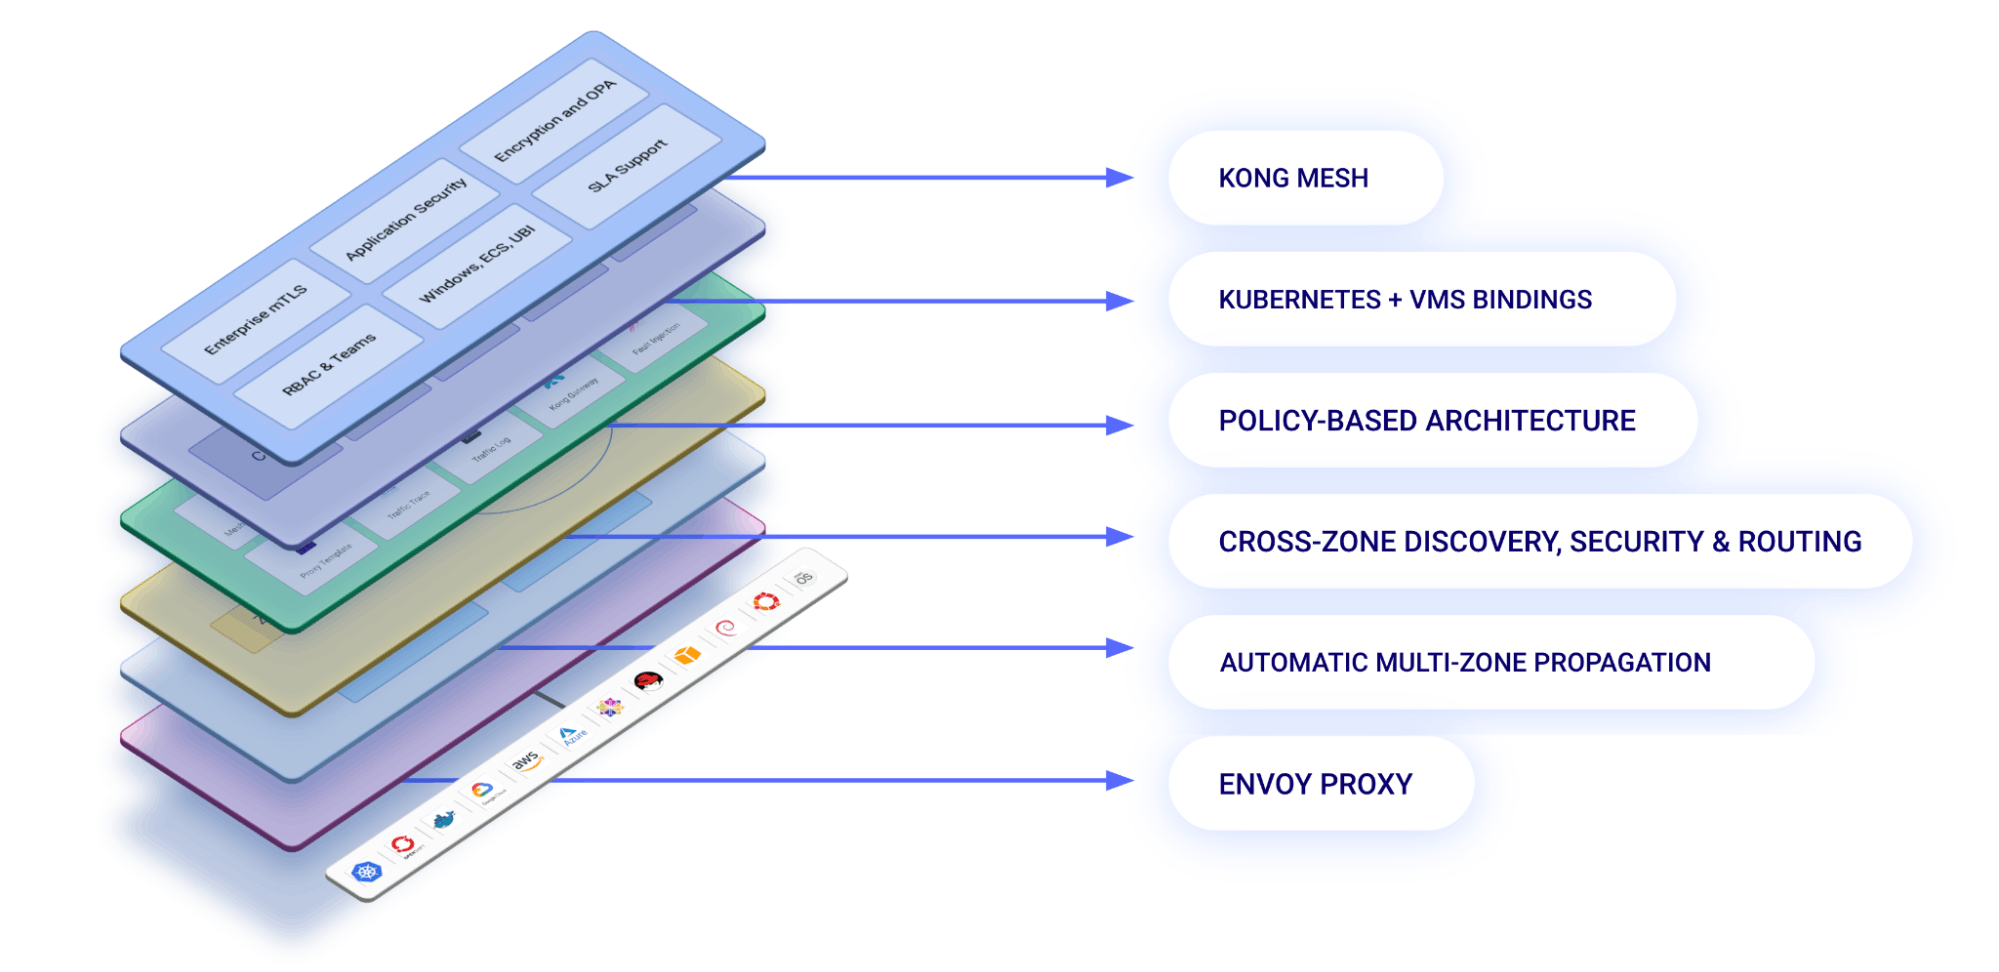 Diagram illustrating how Kong Mesh expands Kuma and Envoy with more enterprise capabilities, security features, distributions and 24/7/365 support among the others.